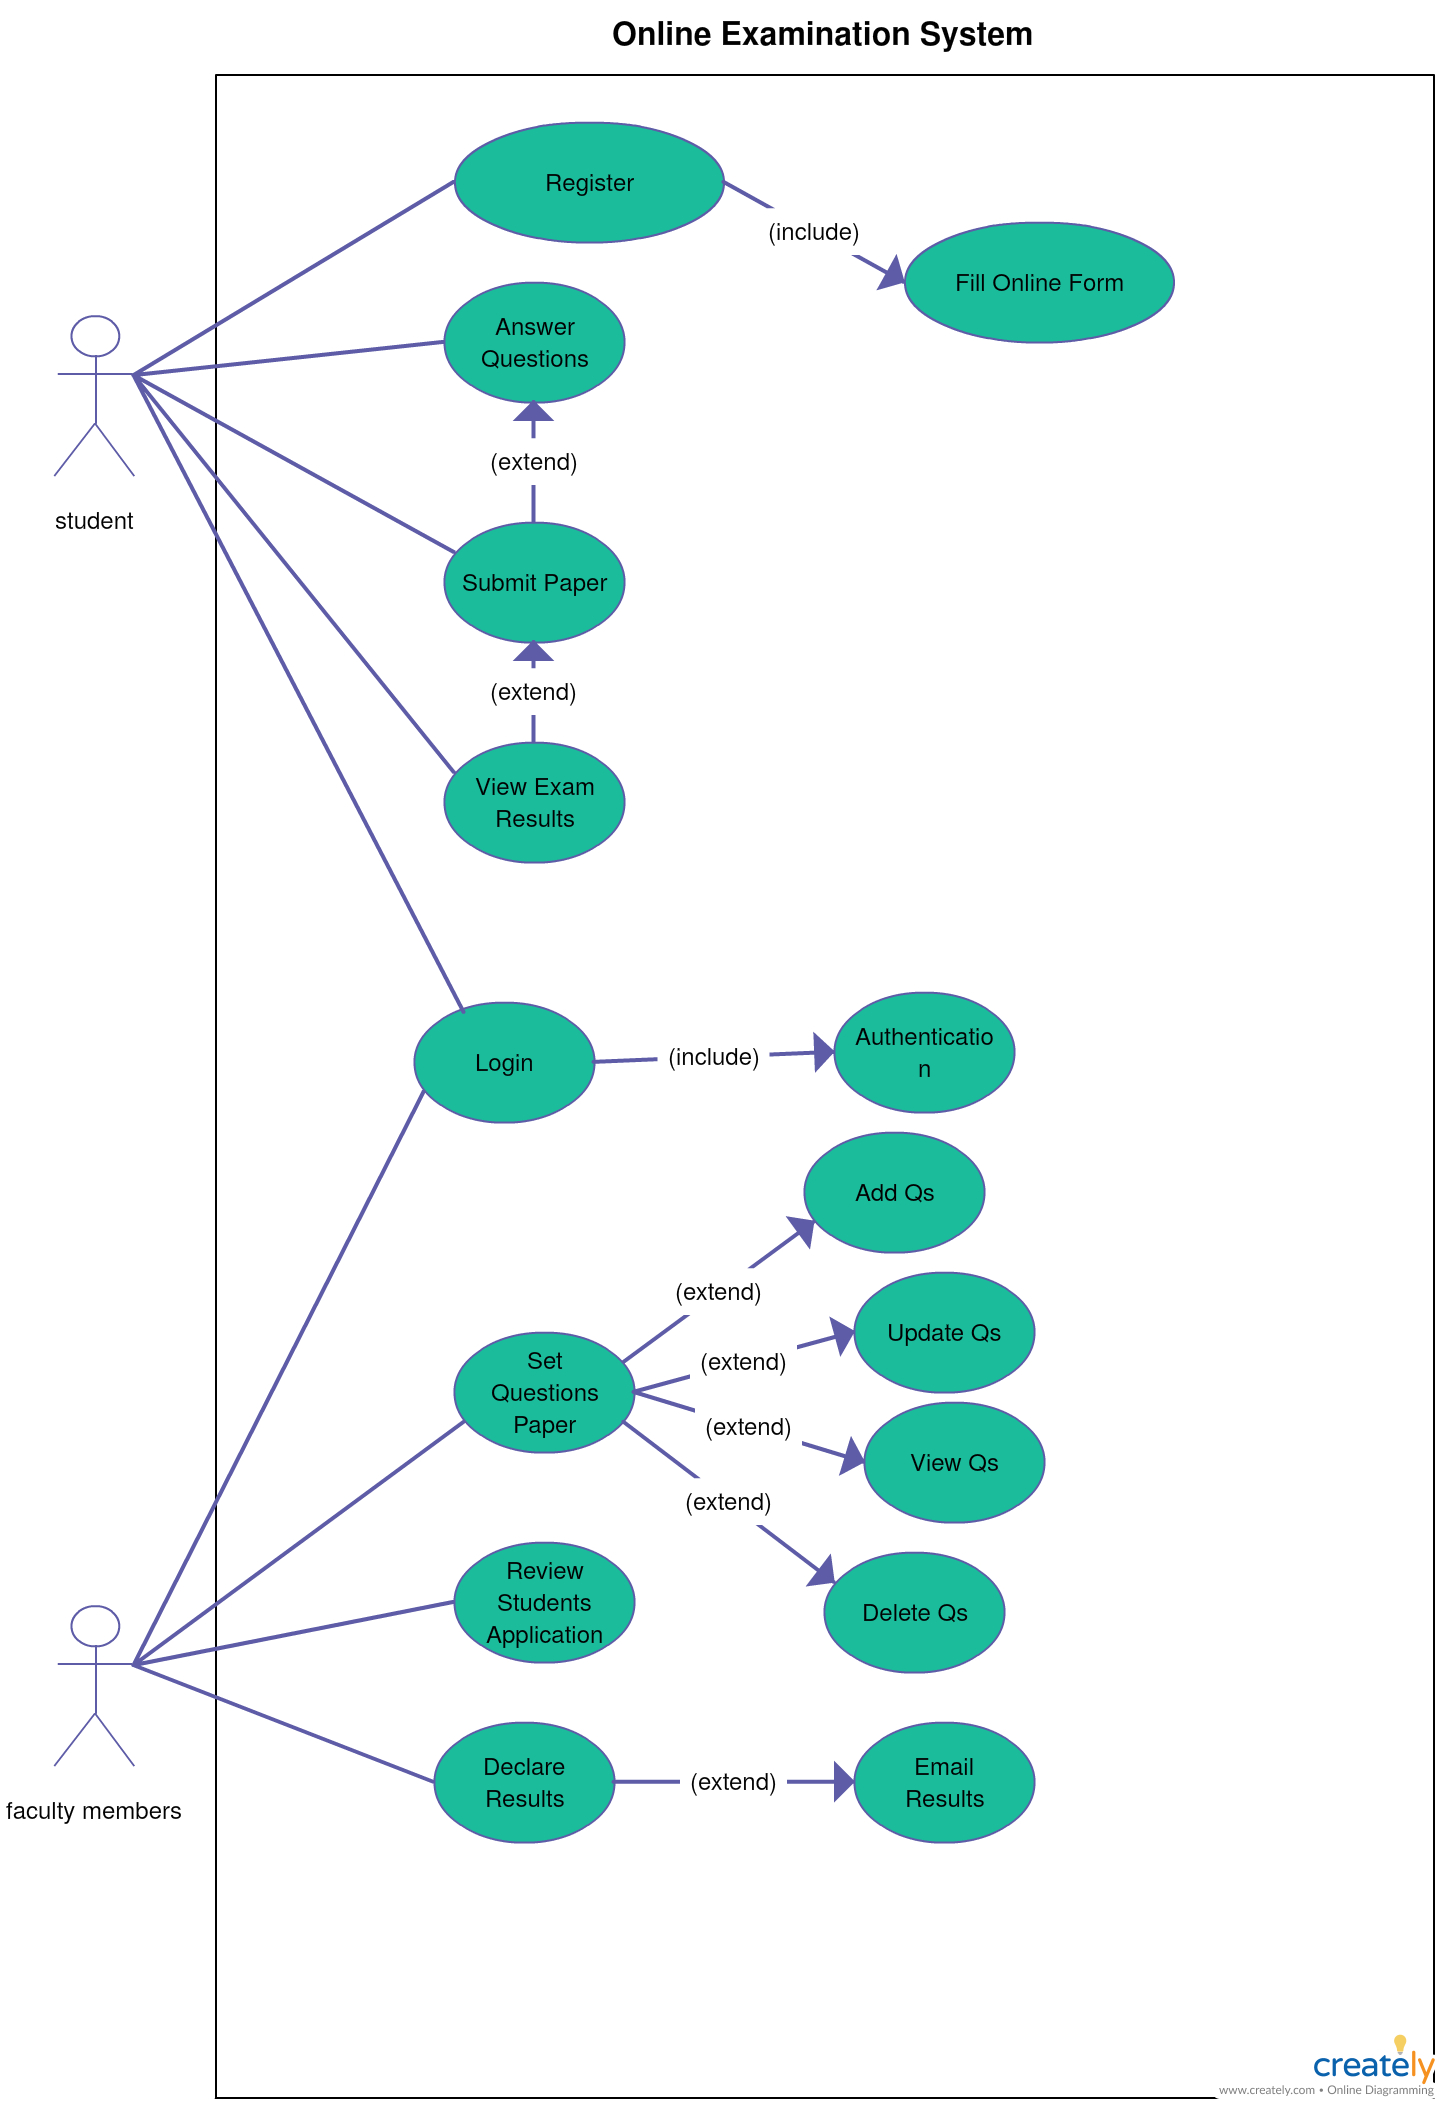 This Is A Use Case Diagram For Online Examination System inside E Farming Er Diagram